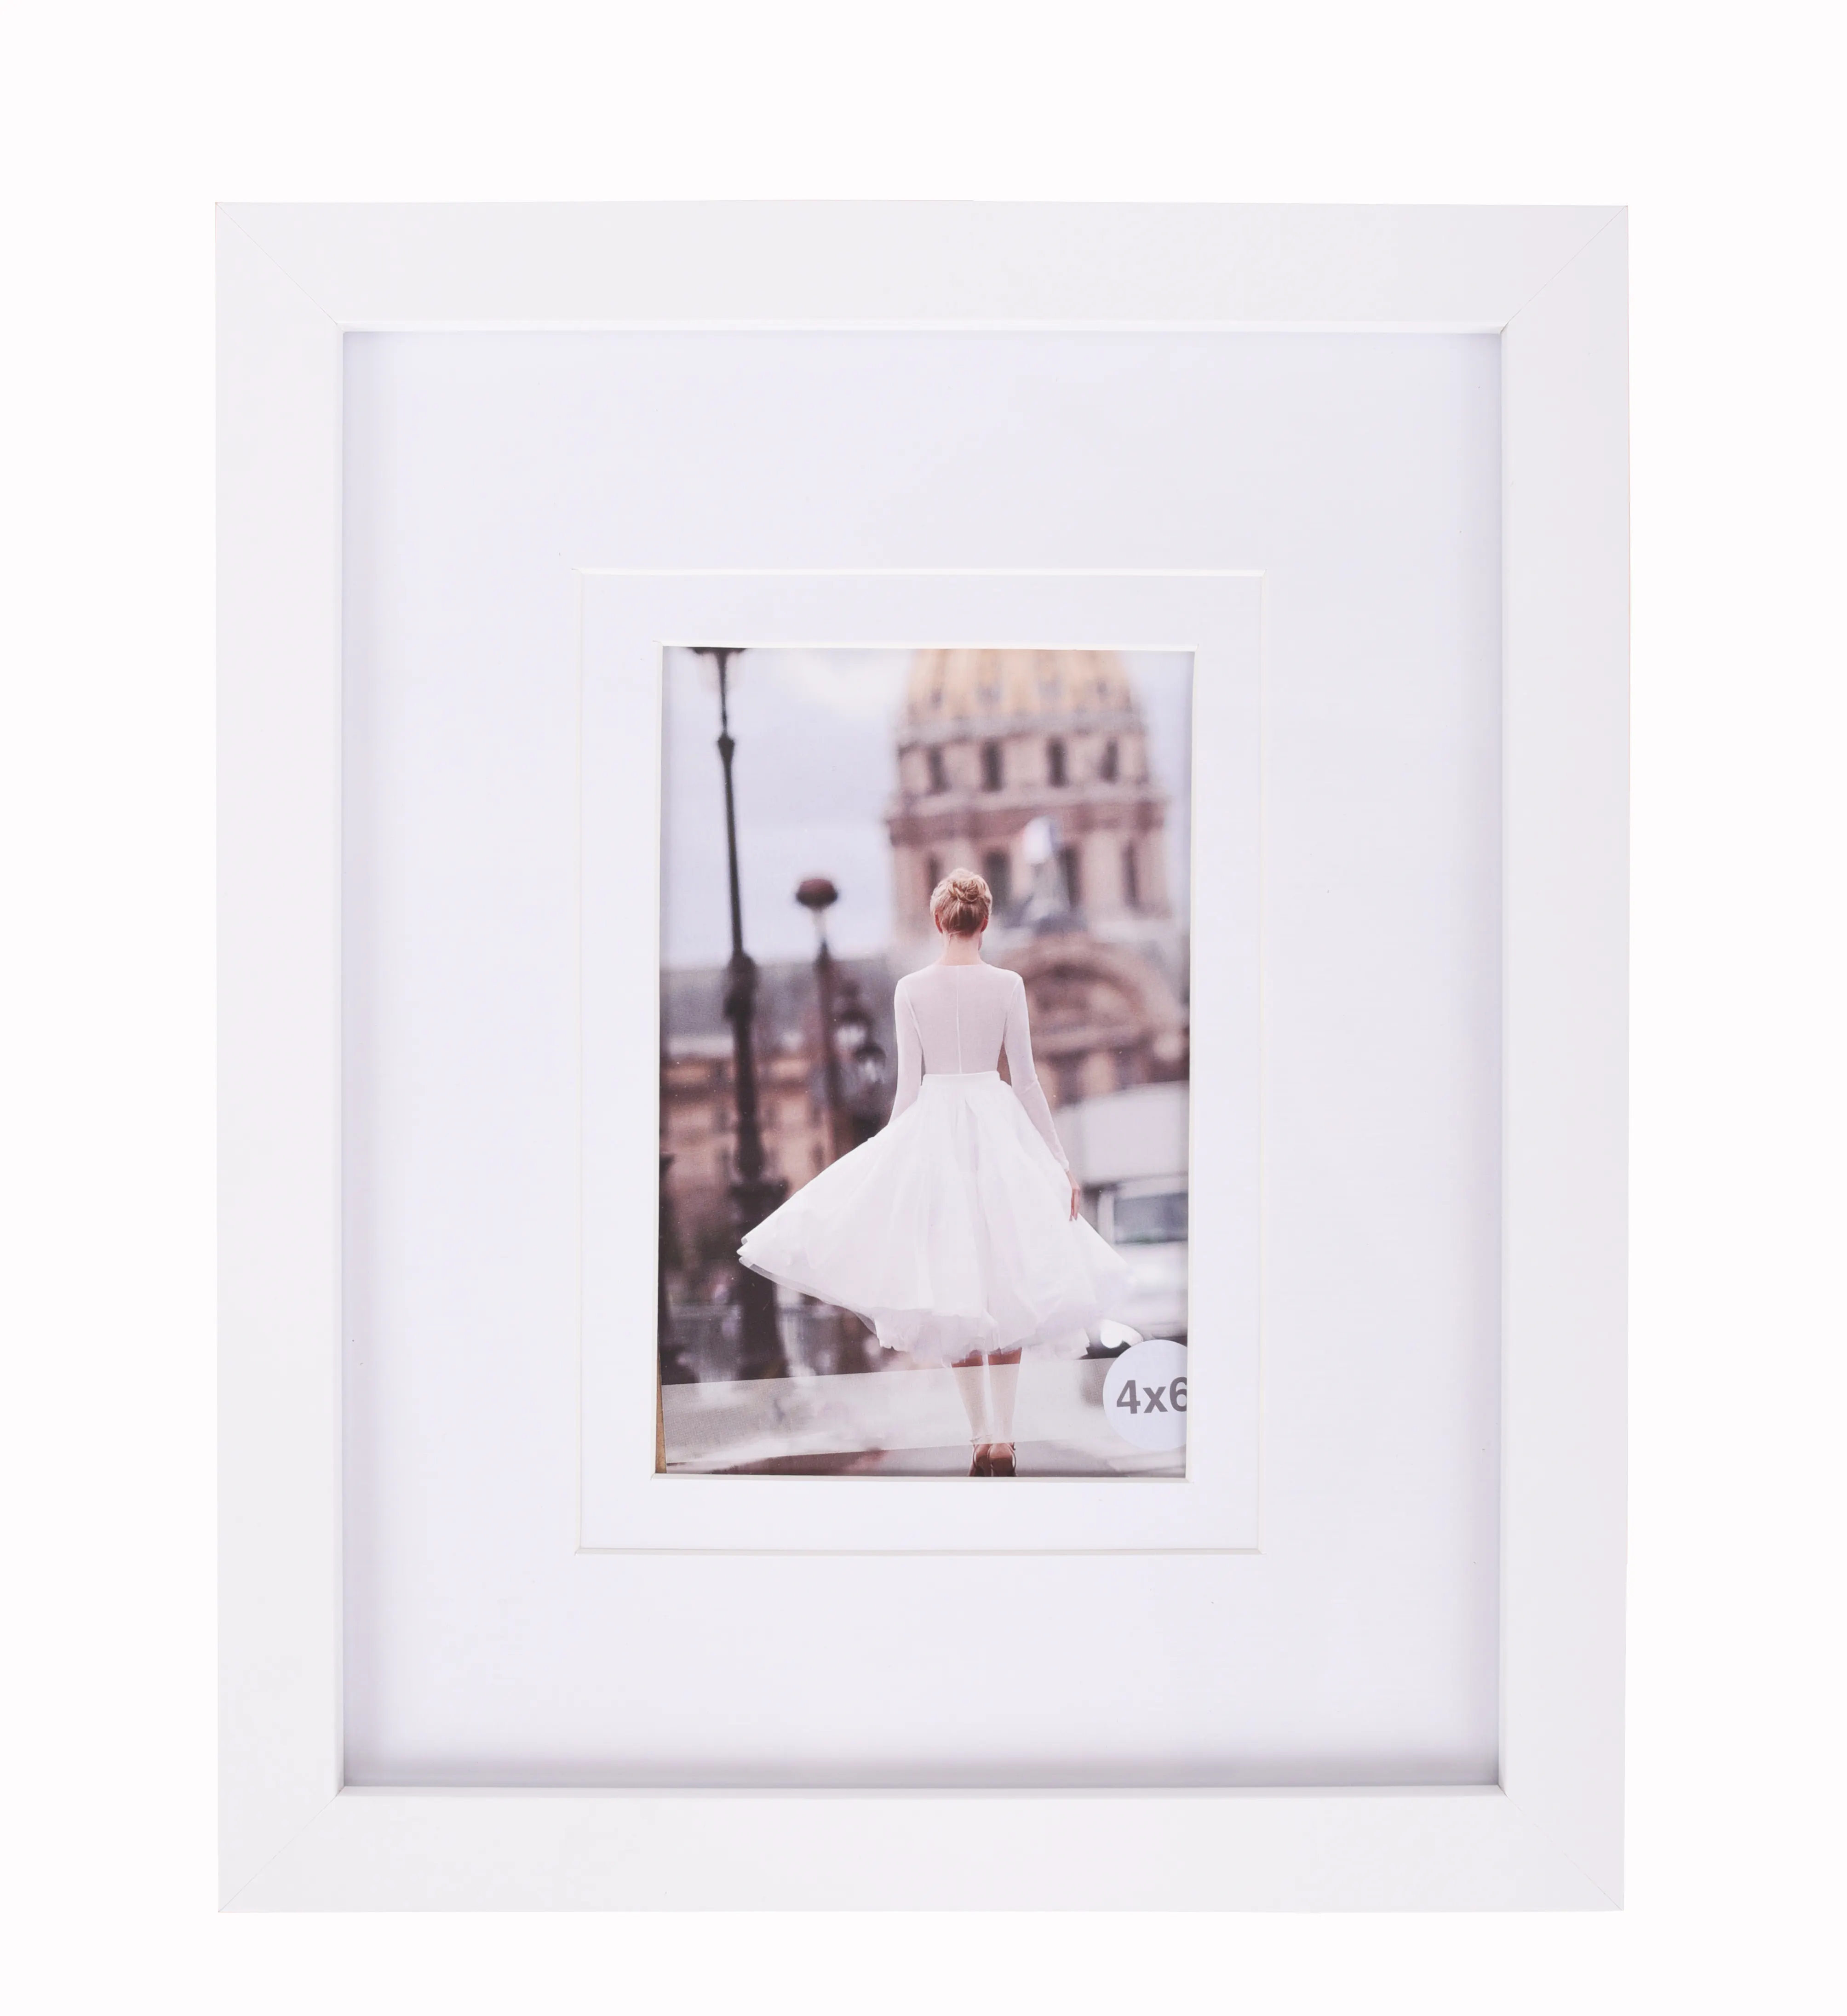 Trending 2021 Amazon Custom Size Tabletop Mounted A4 MDF White Photo Frame